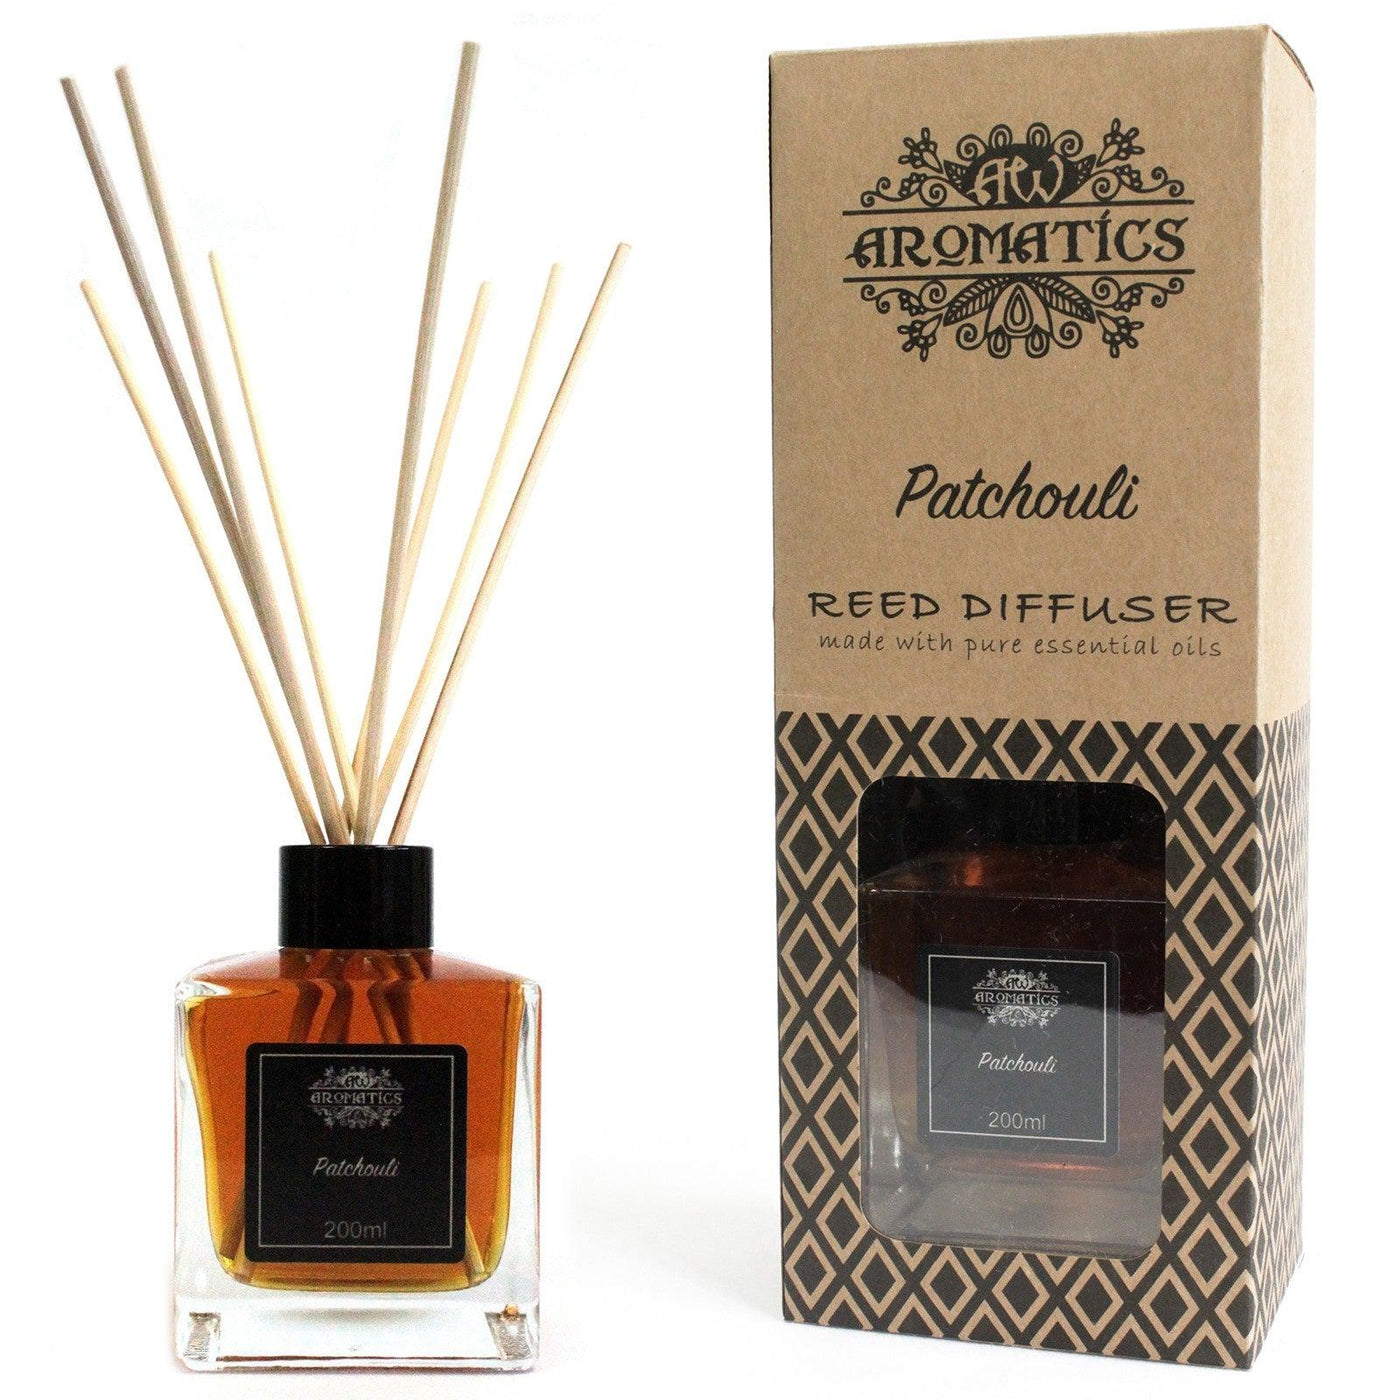 200ml Patchouli Essential Oil Reed Fragrance Diffuser.